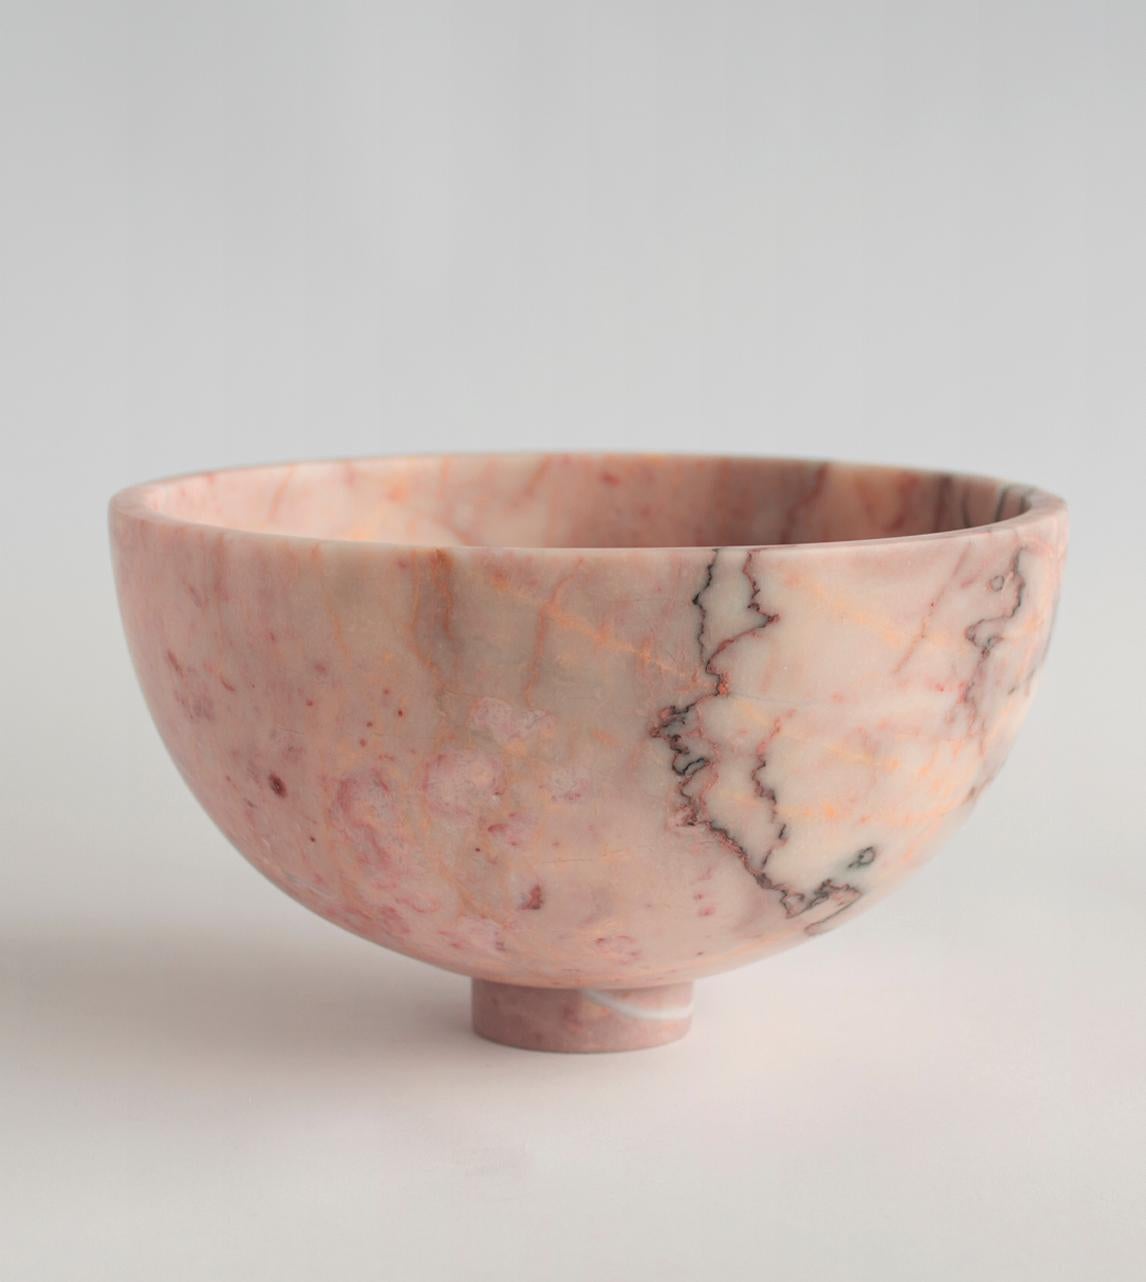 A substantial pink marble bowl with unique white veining rests atop a mini pedestal for a grand presentation of fruits and vegetables. It is truly an eyecatcher in your dining room. 

There may be natural variations that are not product flaws, they